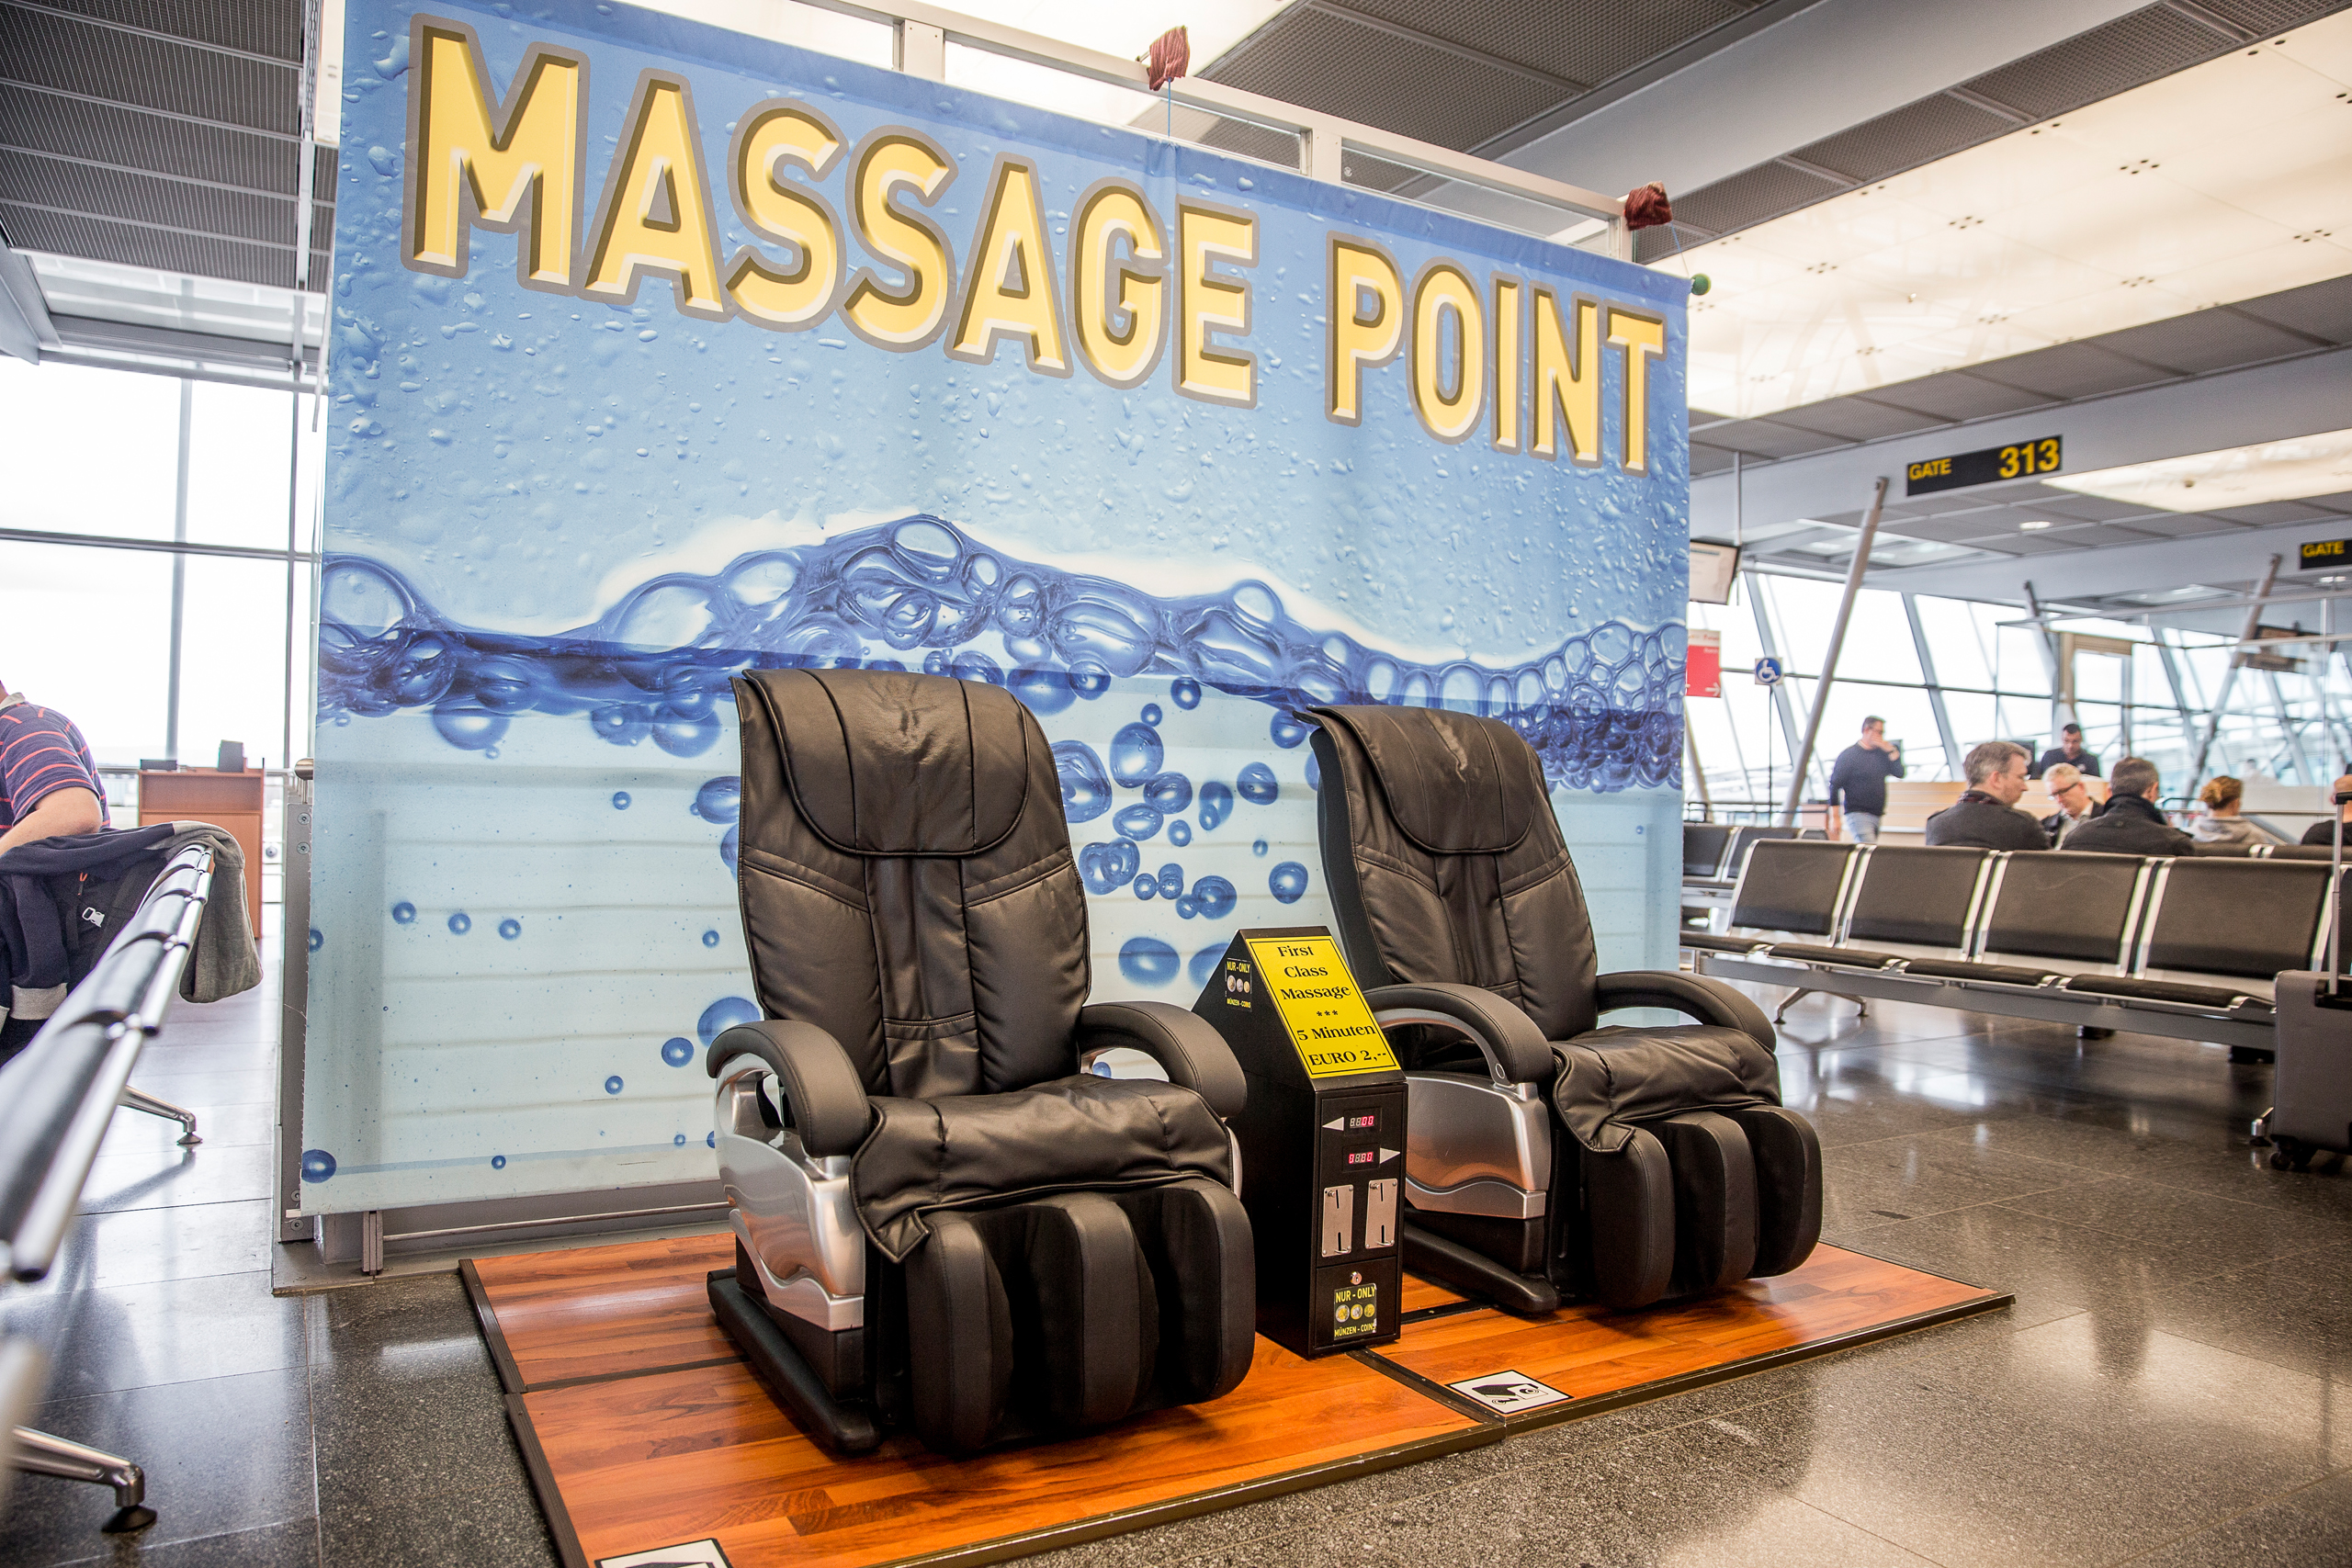 south point hotel and casino massage therapist